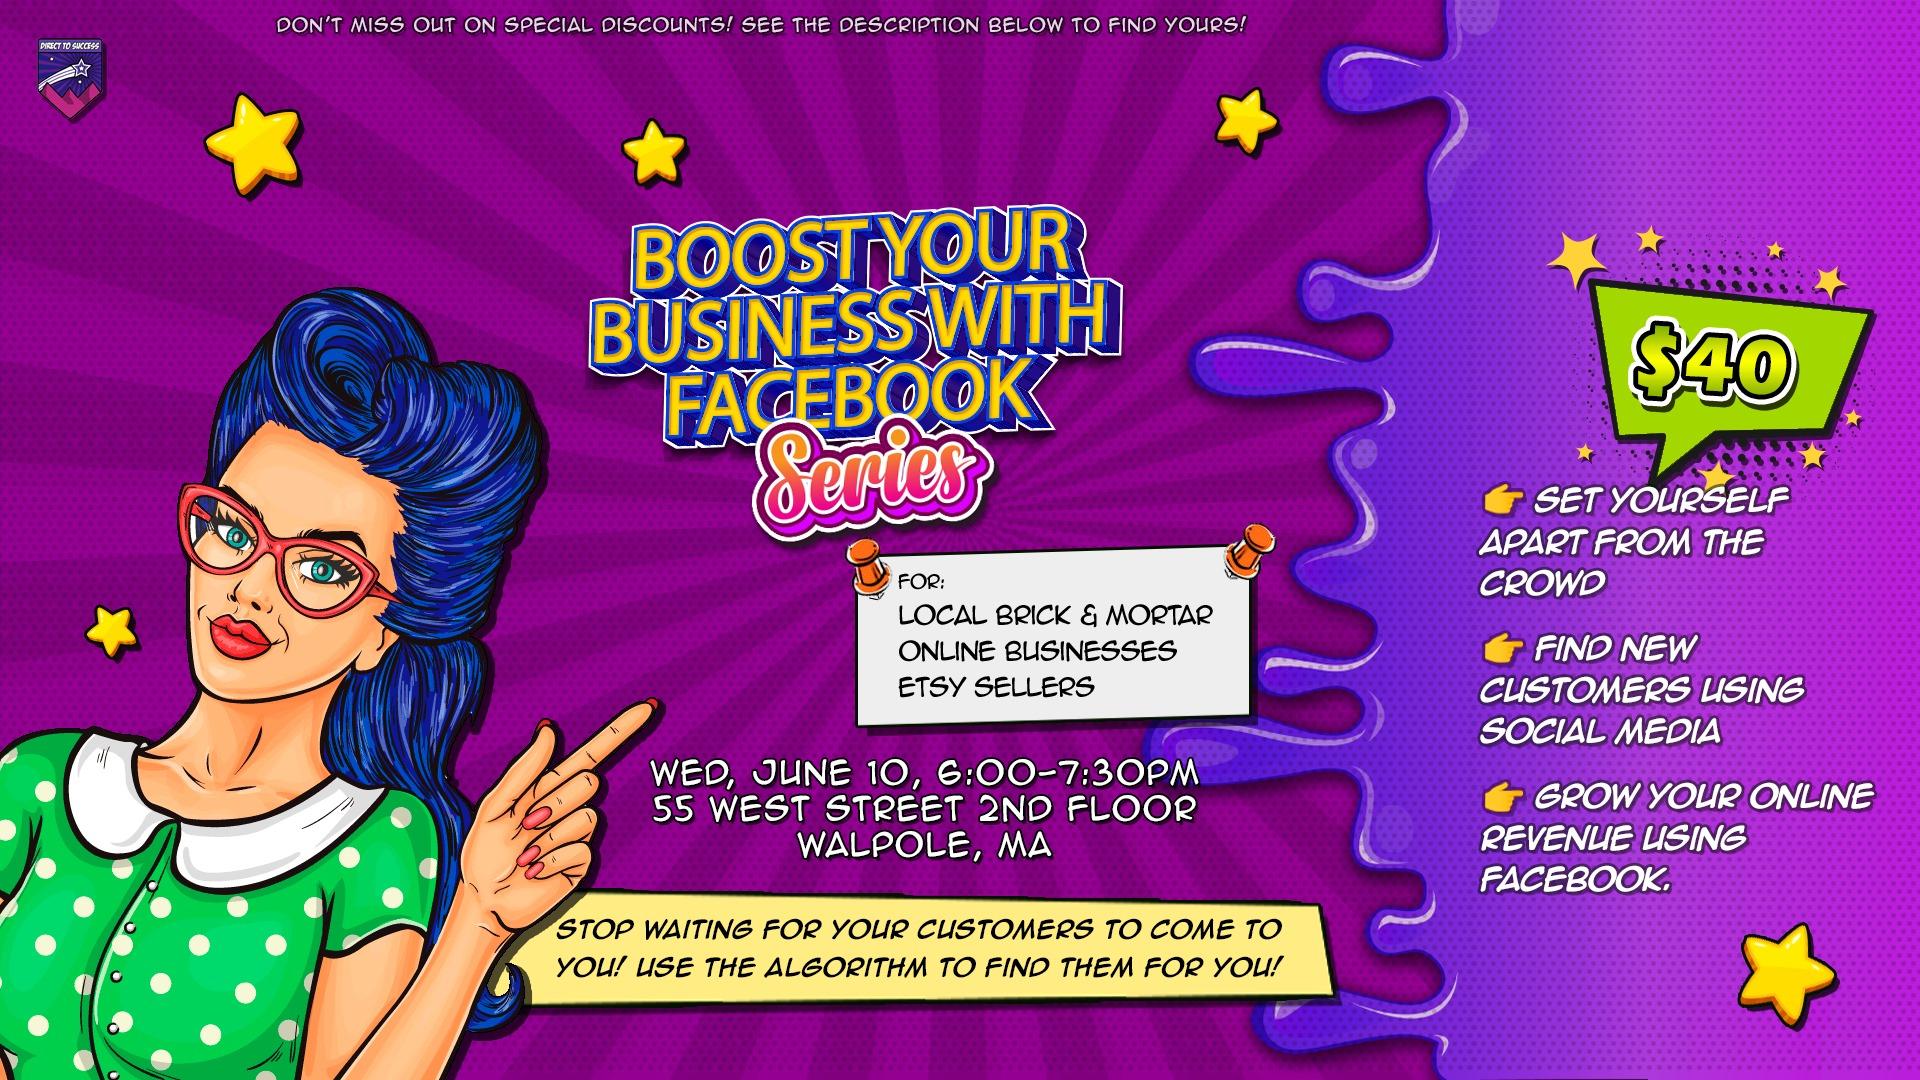 Boost Your Business with Facebook, Walpole MA